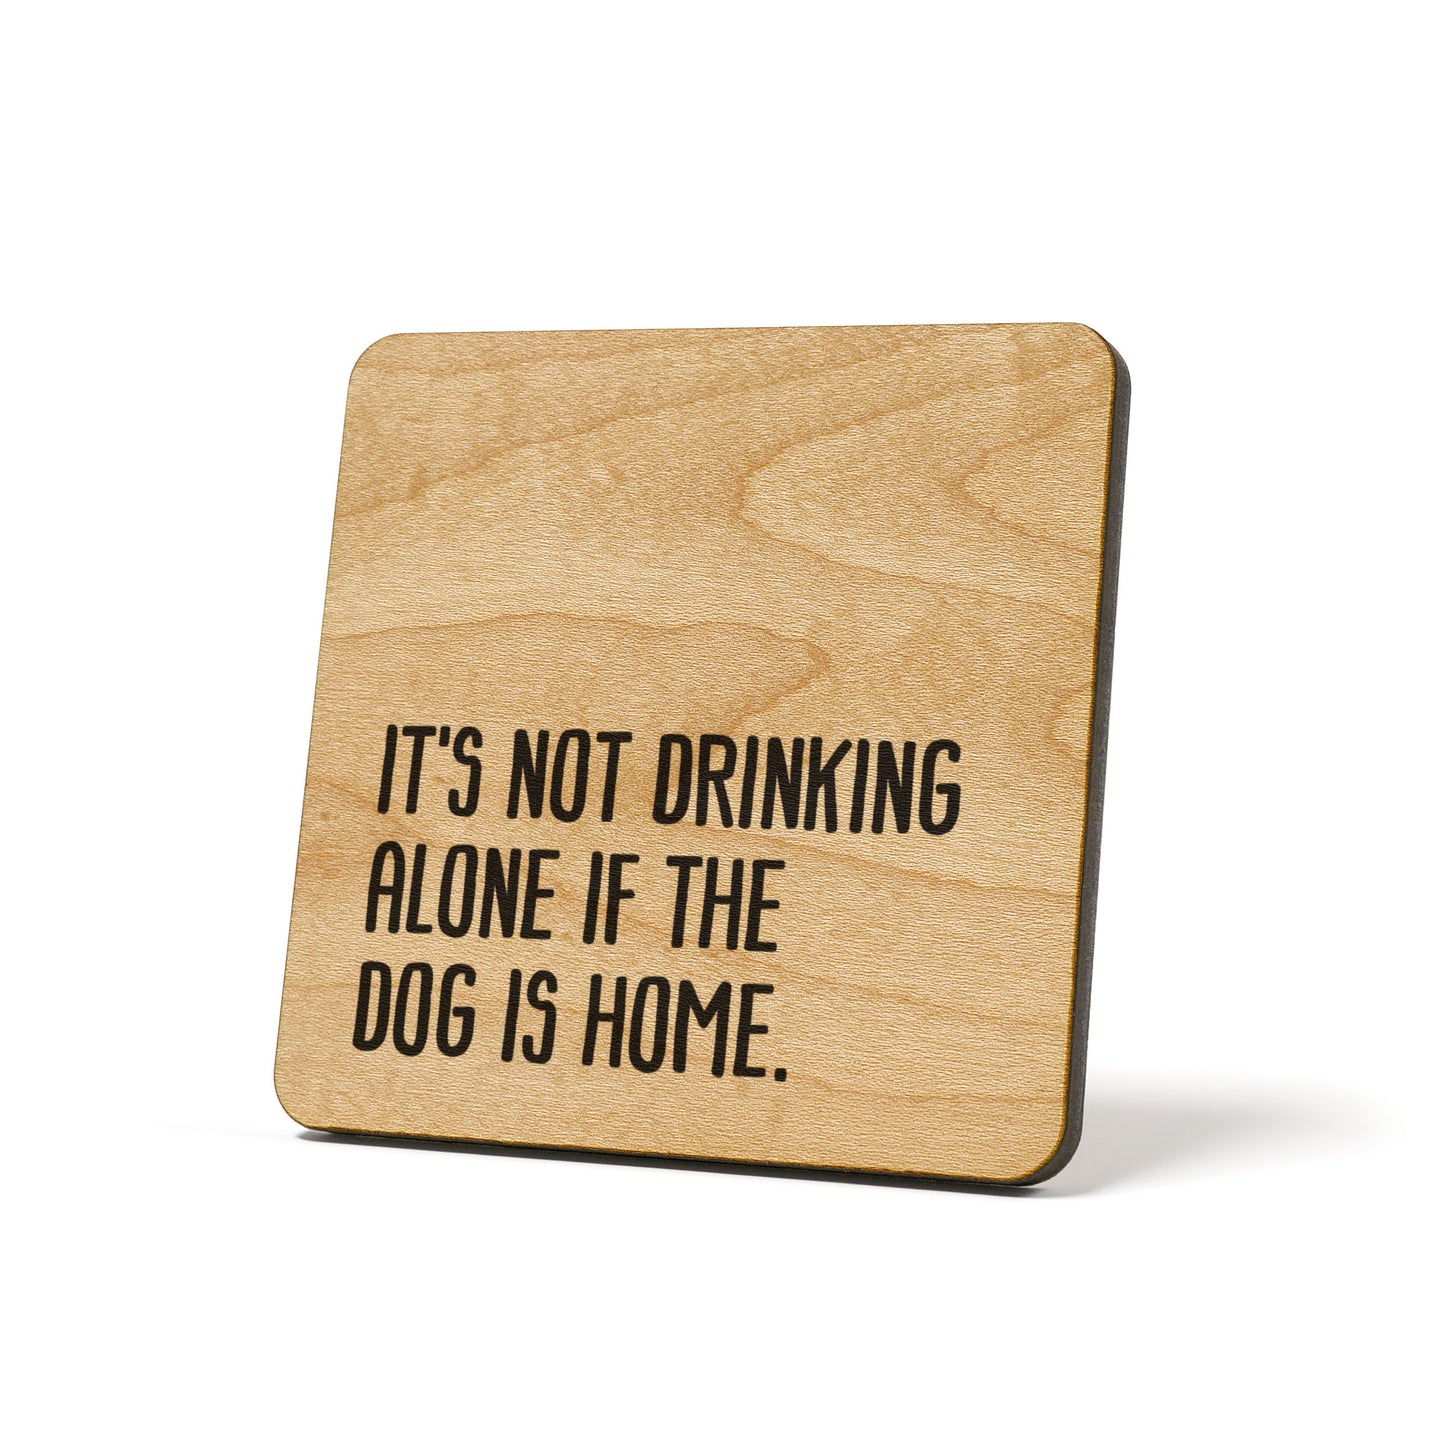 It's not drinking alone if the dog is here Quote Coaster